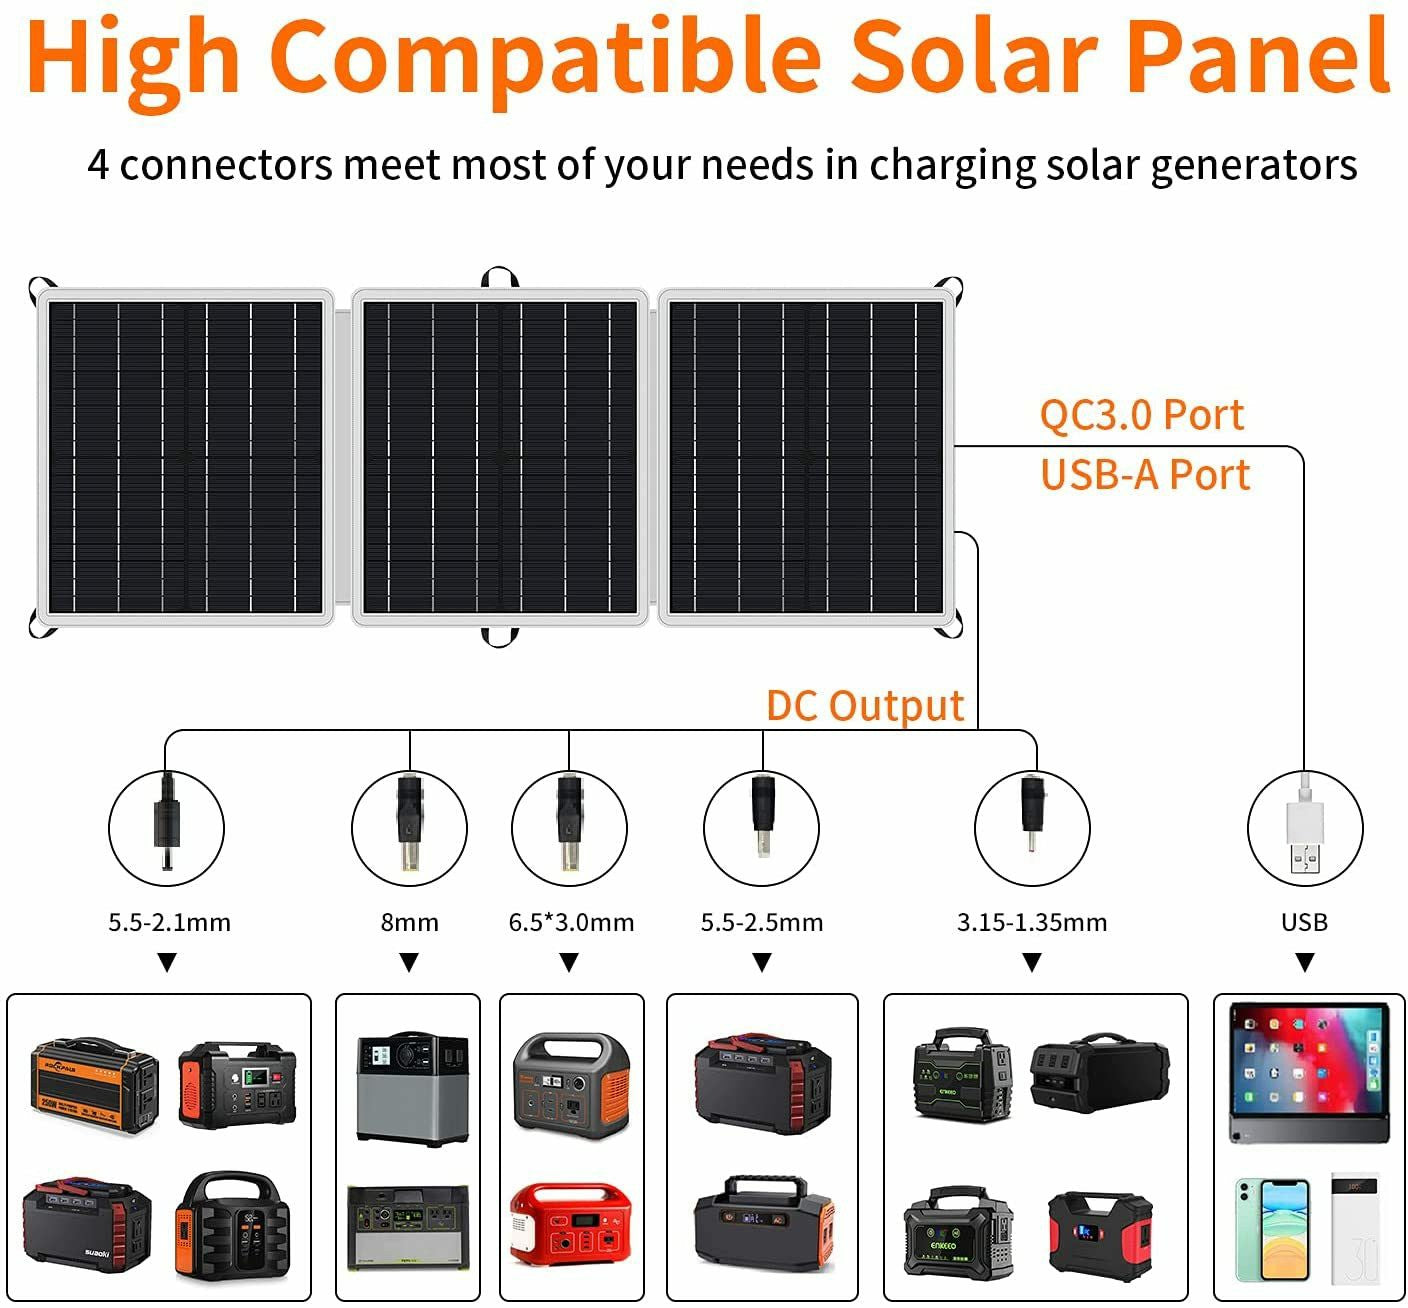 Gofort 60w 18v Portable Solar Panel With Usb, 18v Dc, Qc 3.0 Output, Compatible With Solar Generator Power Station Phones Laptops Tablet